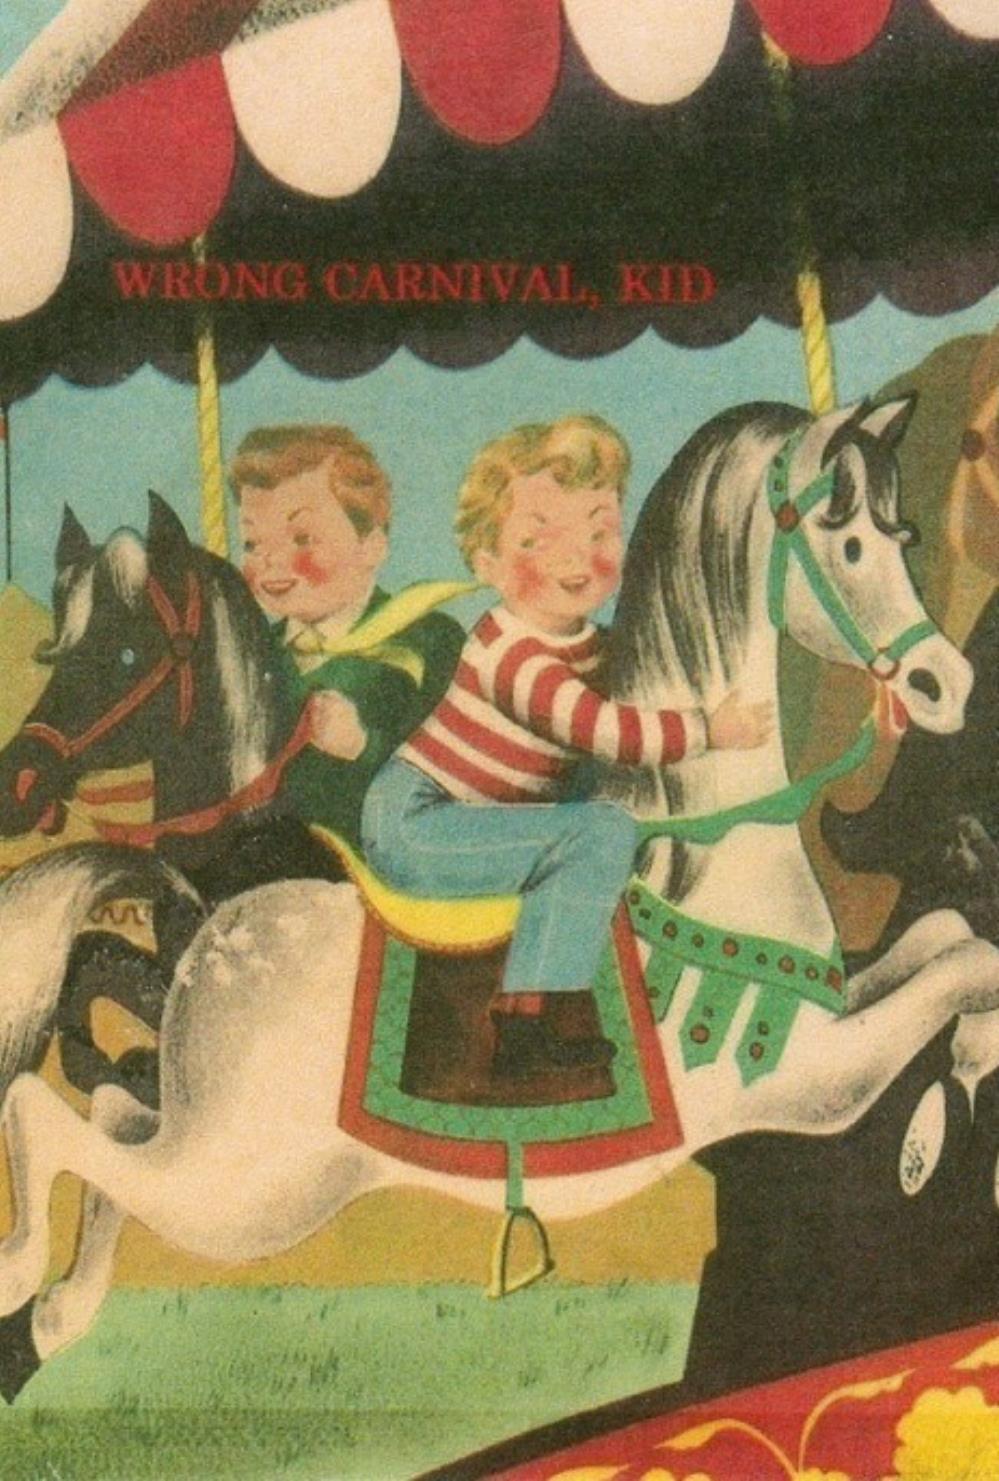 Second Family Band Wrong Carnival, Kid album cover